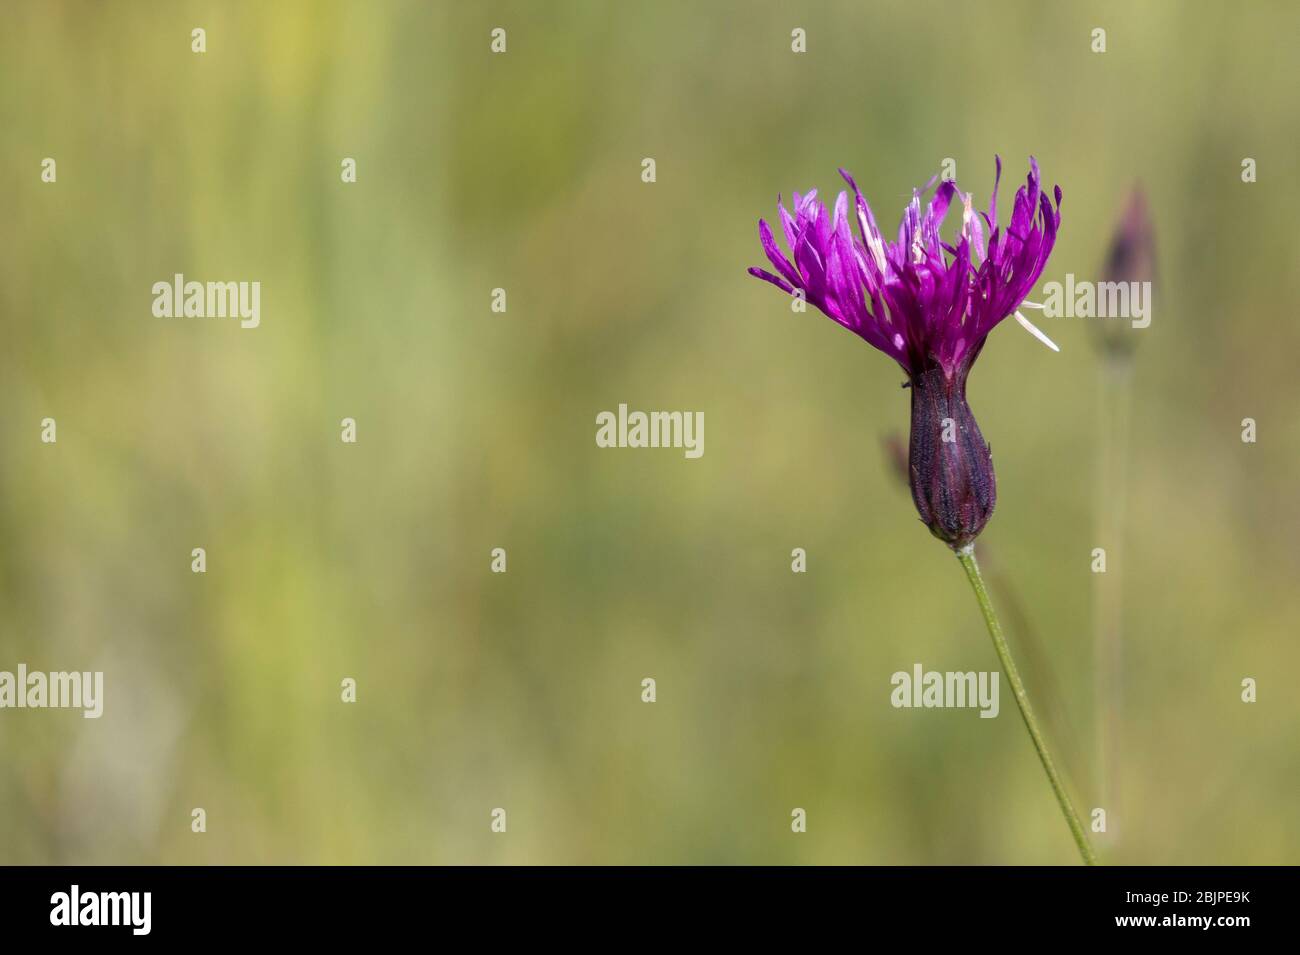 False saw wort, a purple wild flower common in Israel, in a green meadow. A photo with copy space and a shallow depth of field. Stock Photo